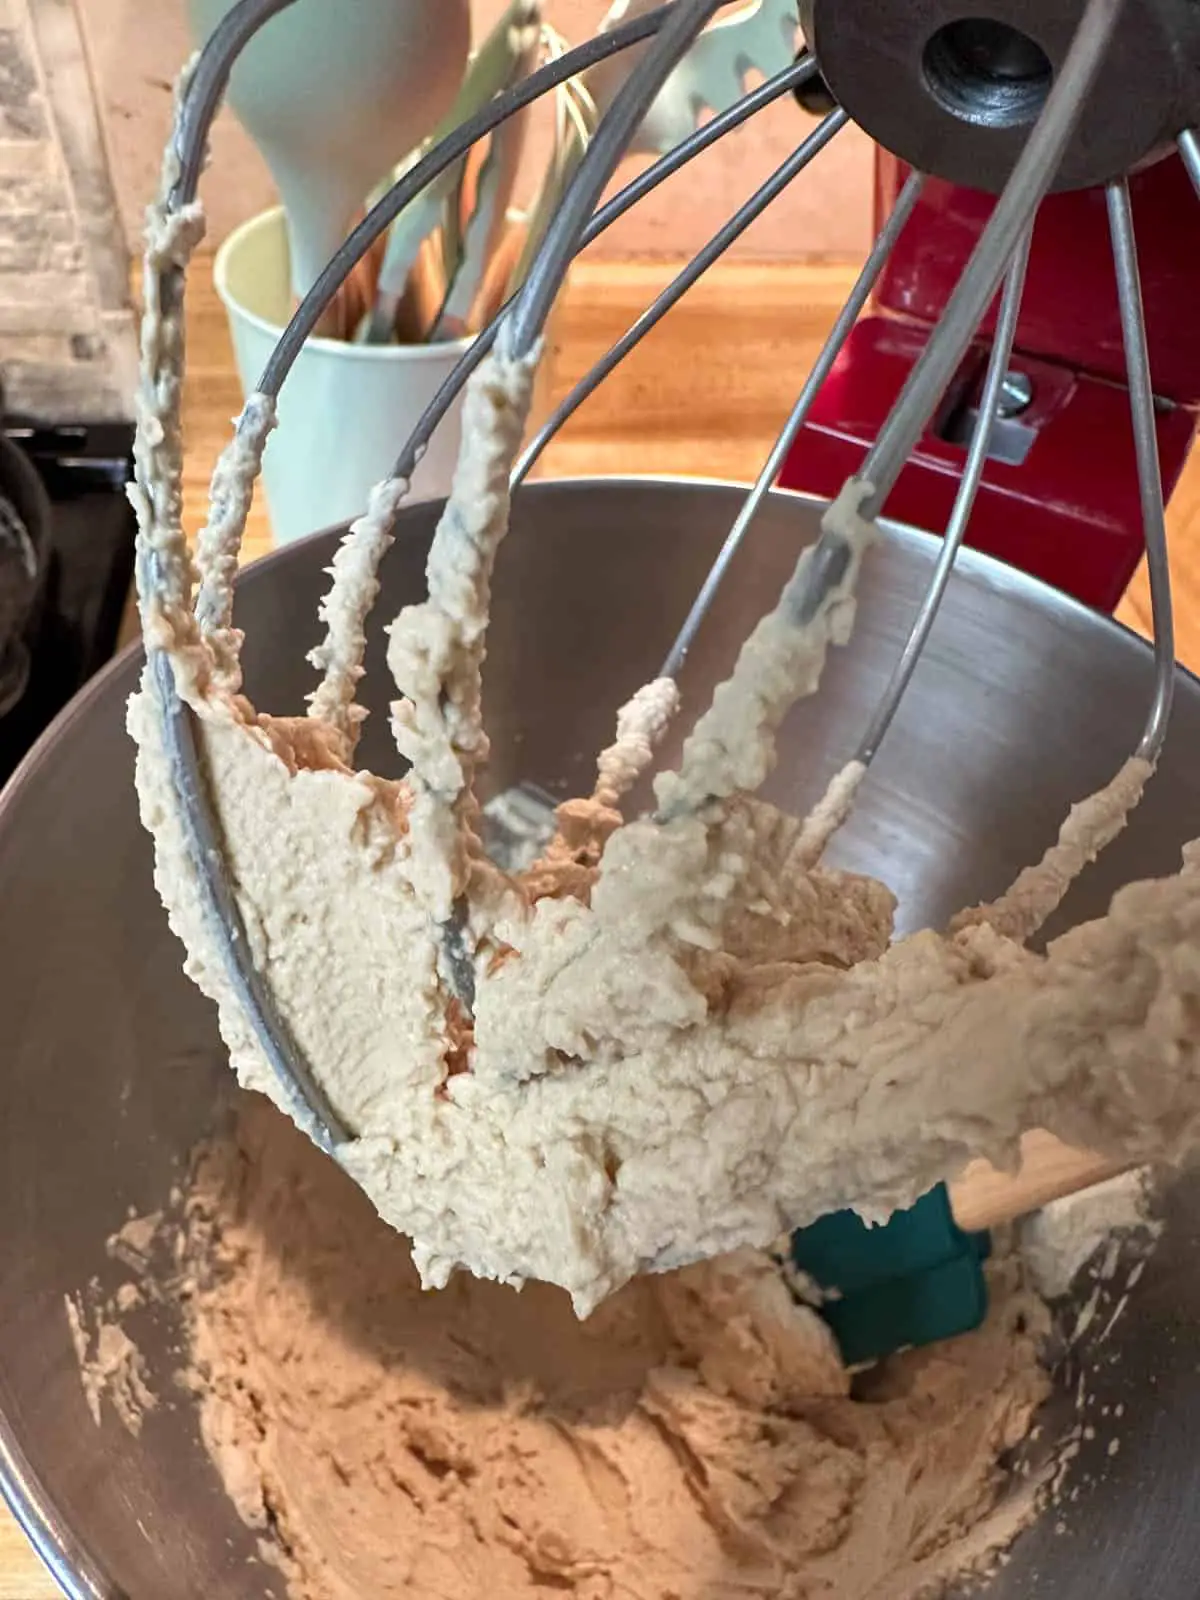 A KitchenAid stand mixer with whipped cream in the mixing bowl and on the whisk attachment. There is a set of kitchen utensils in the background.